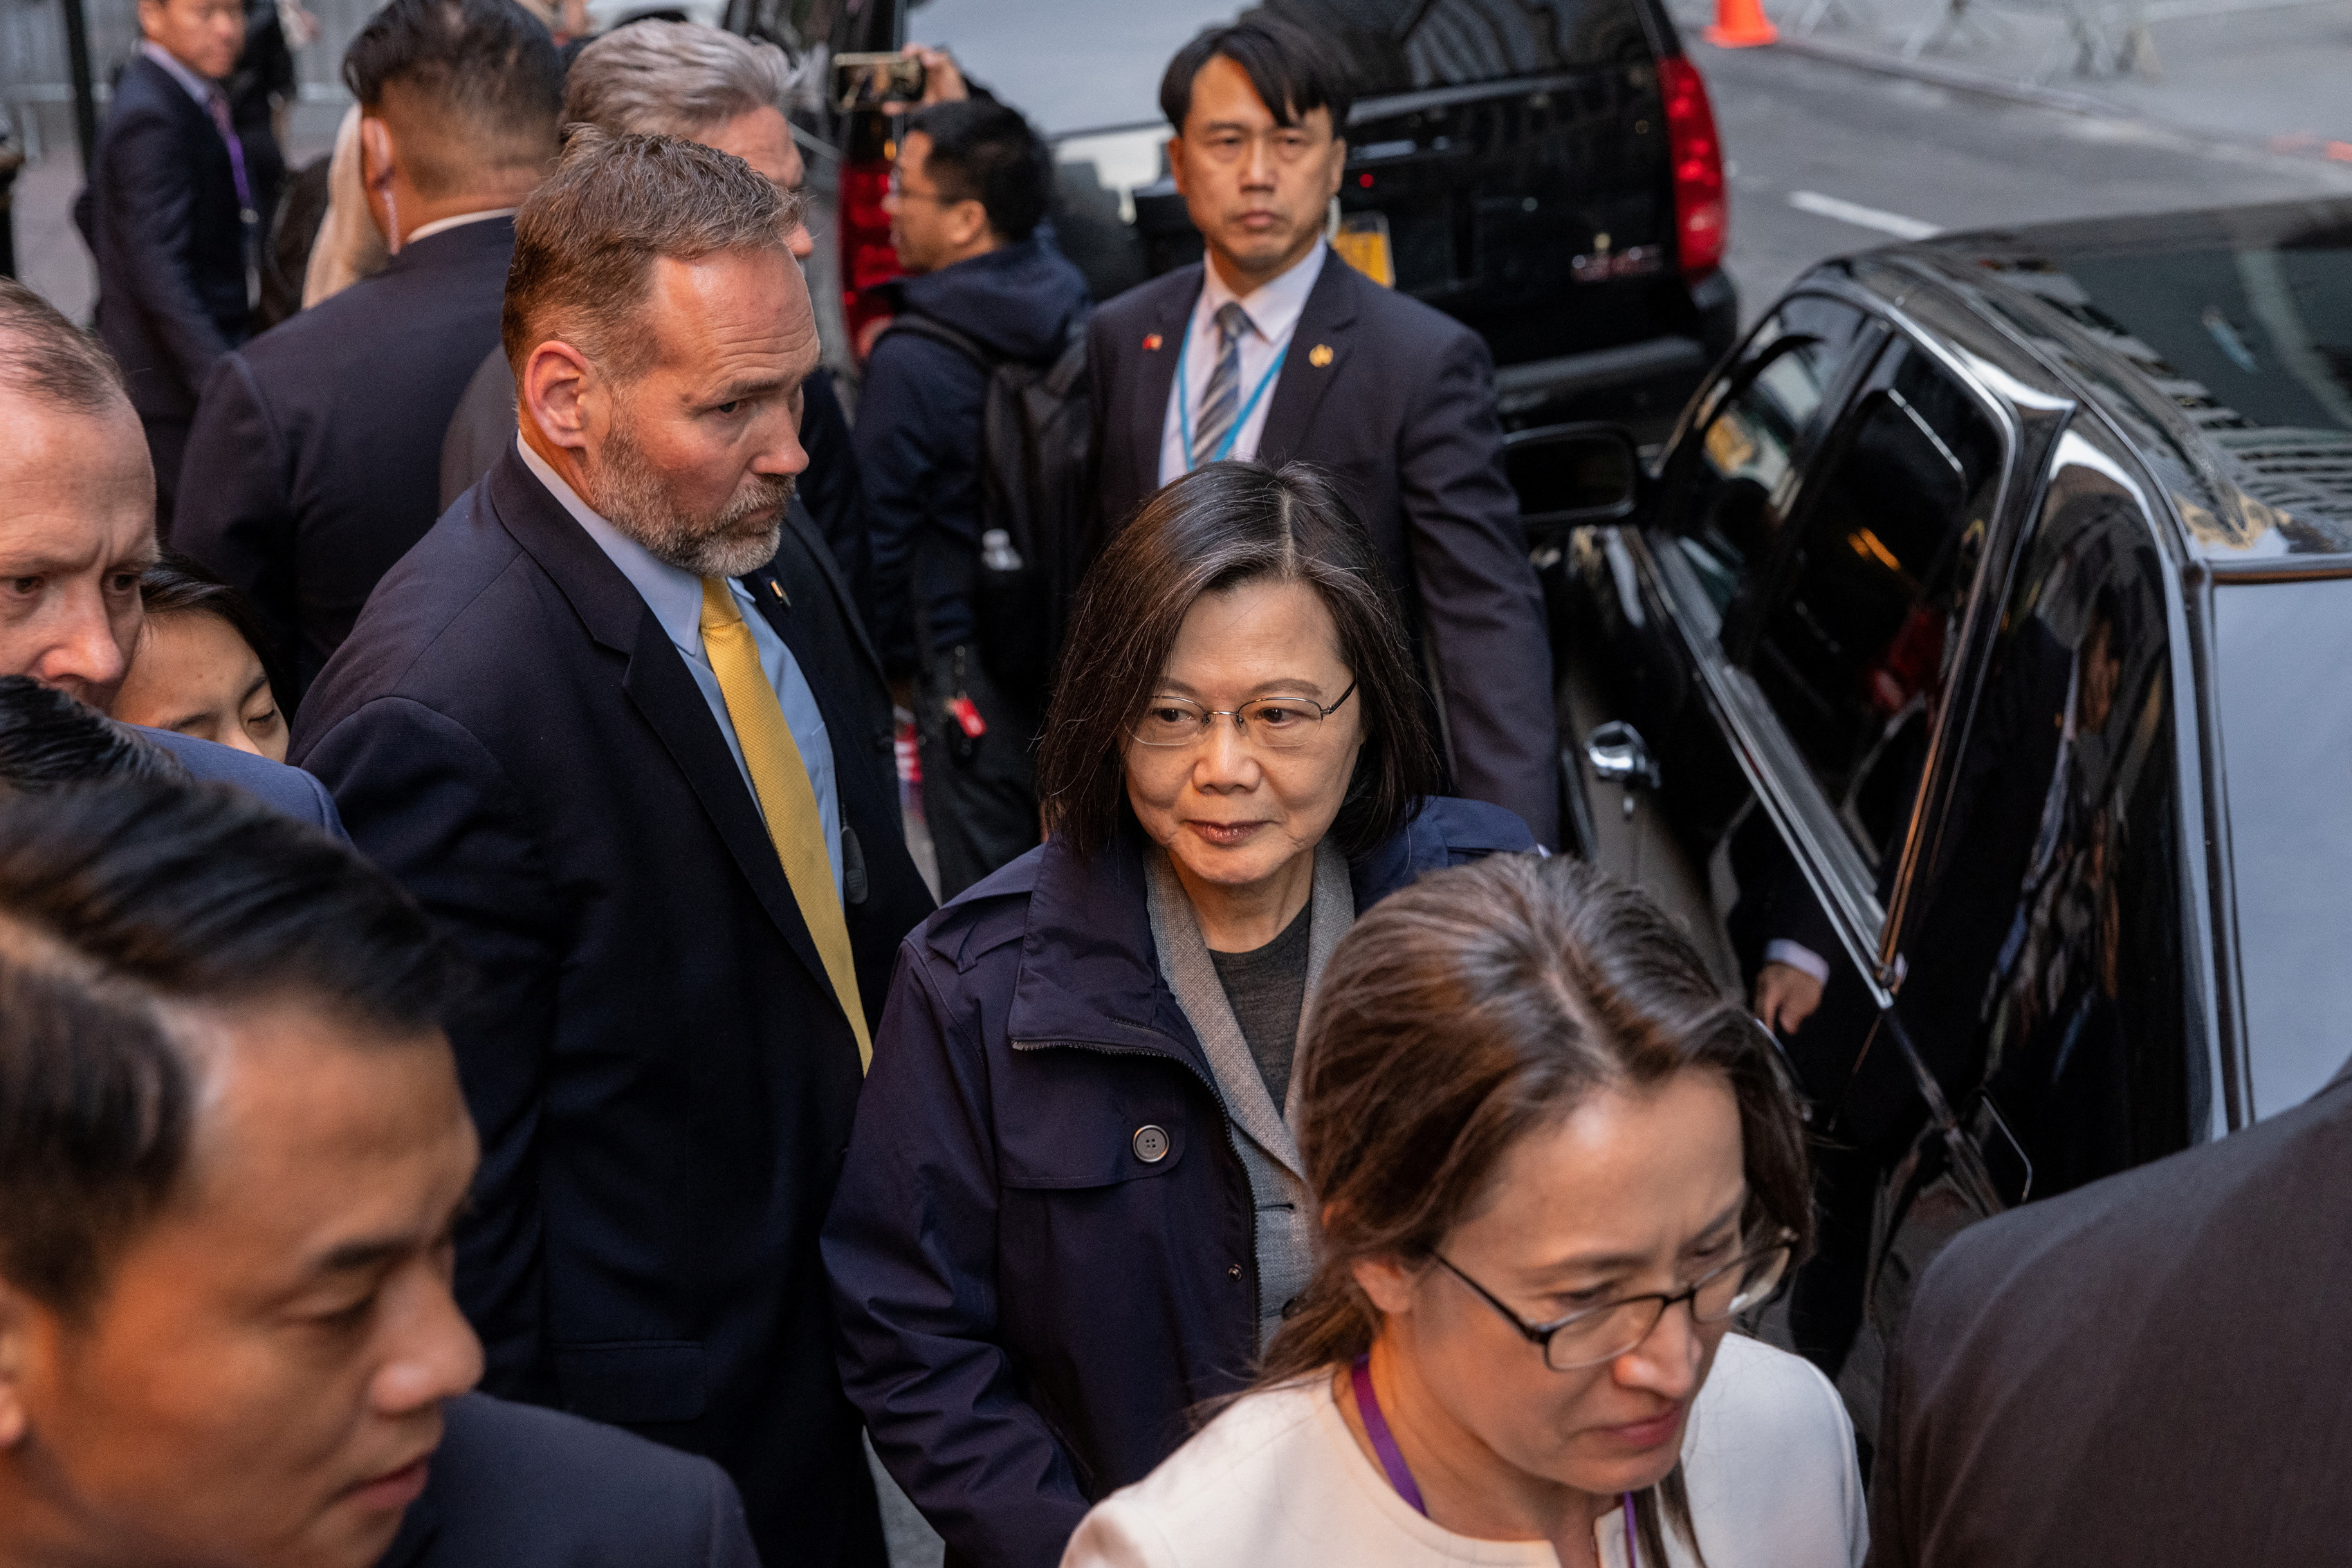 Taiwan’s President Tsai Ing-wen arrives at the Lotte Hotel in Manhattan in New York City